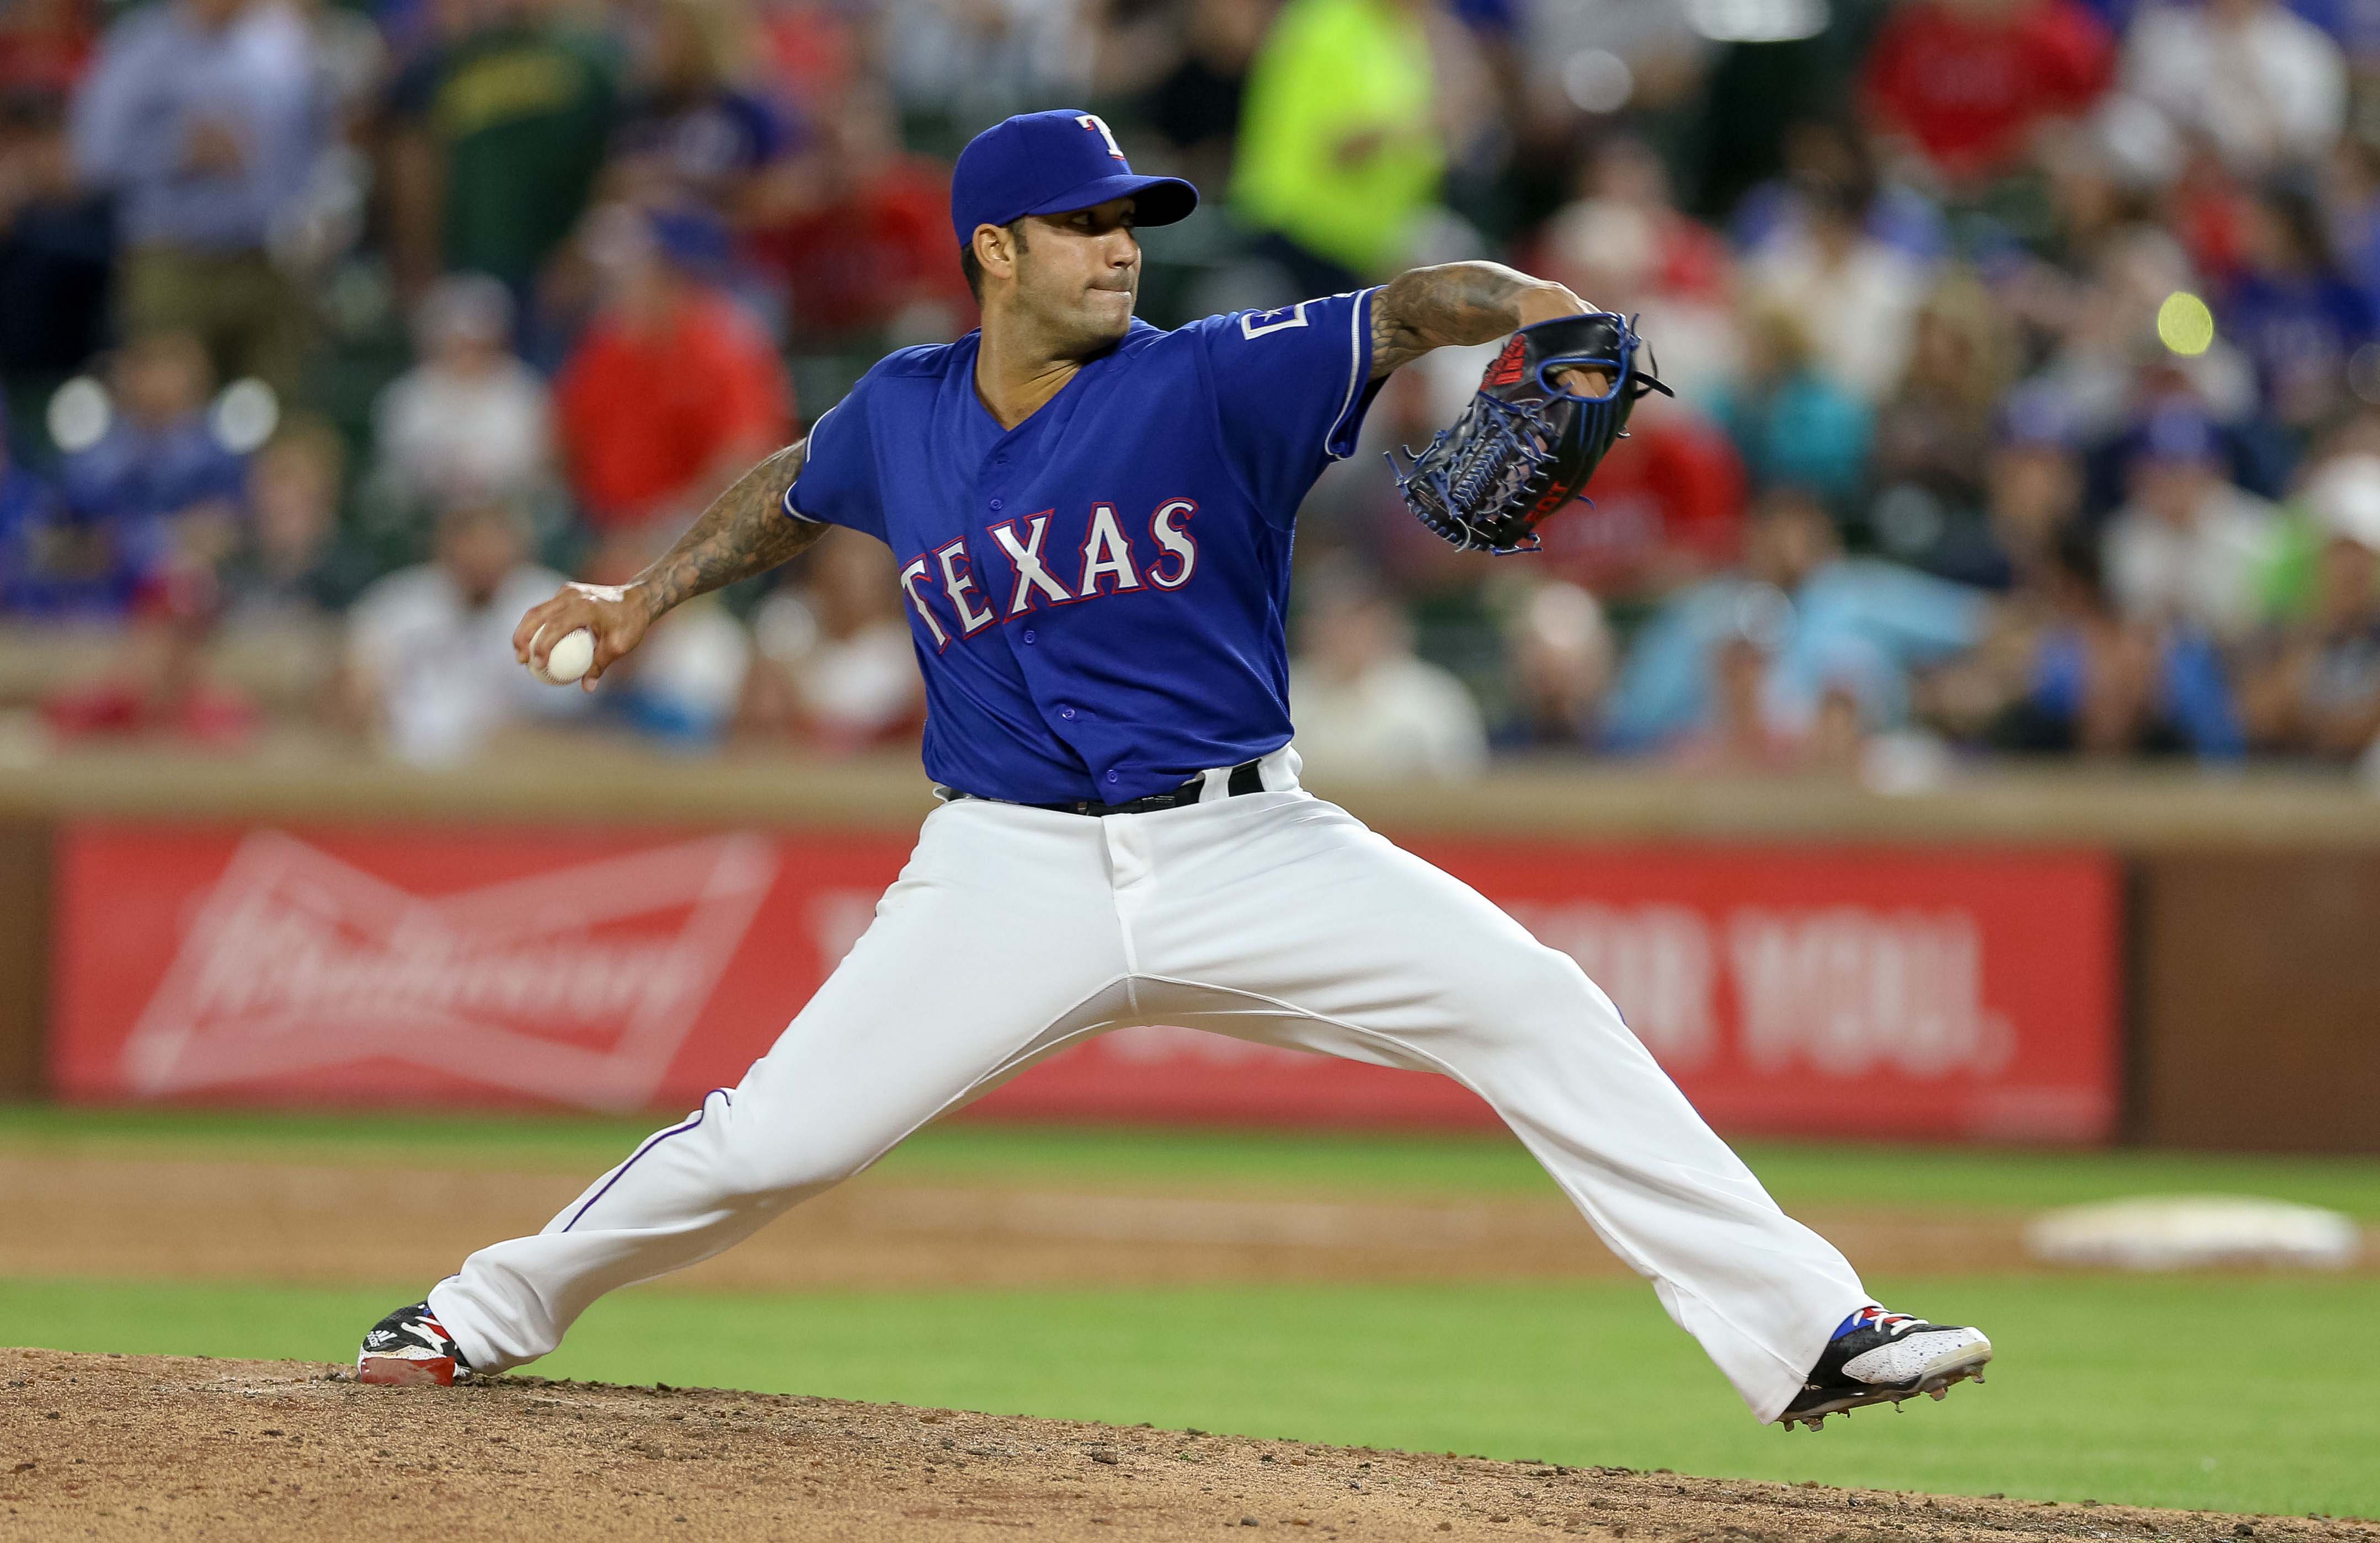 Rangers reliever Bush has elbow surgery out until mid-2019